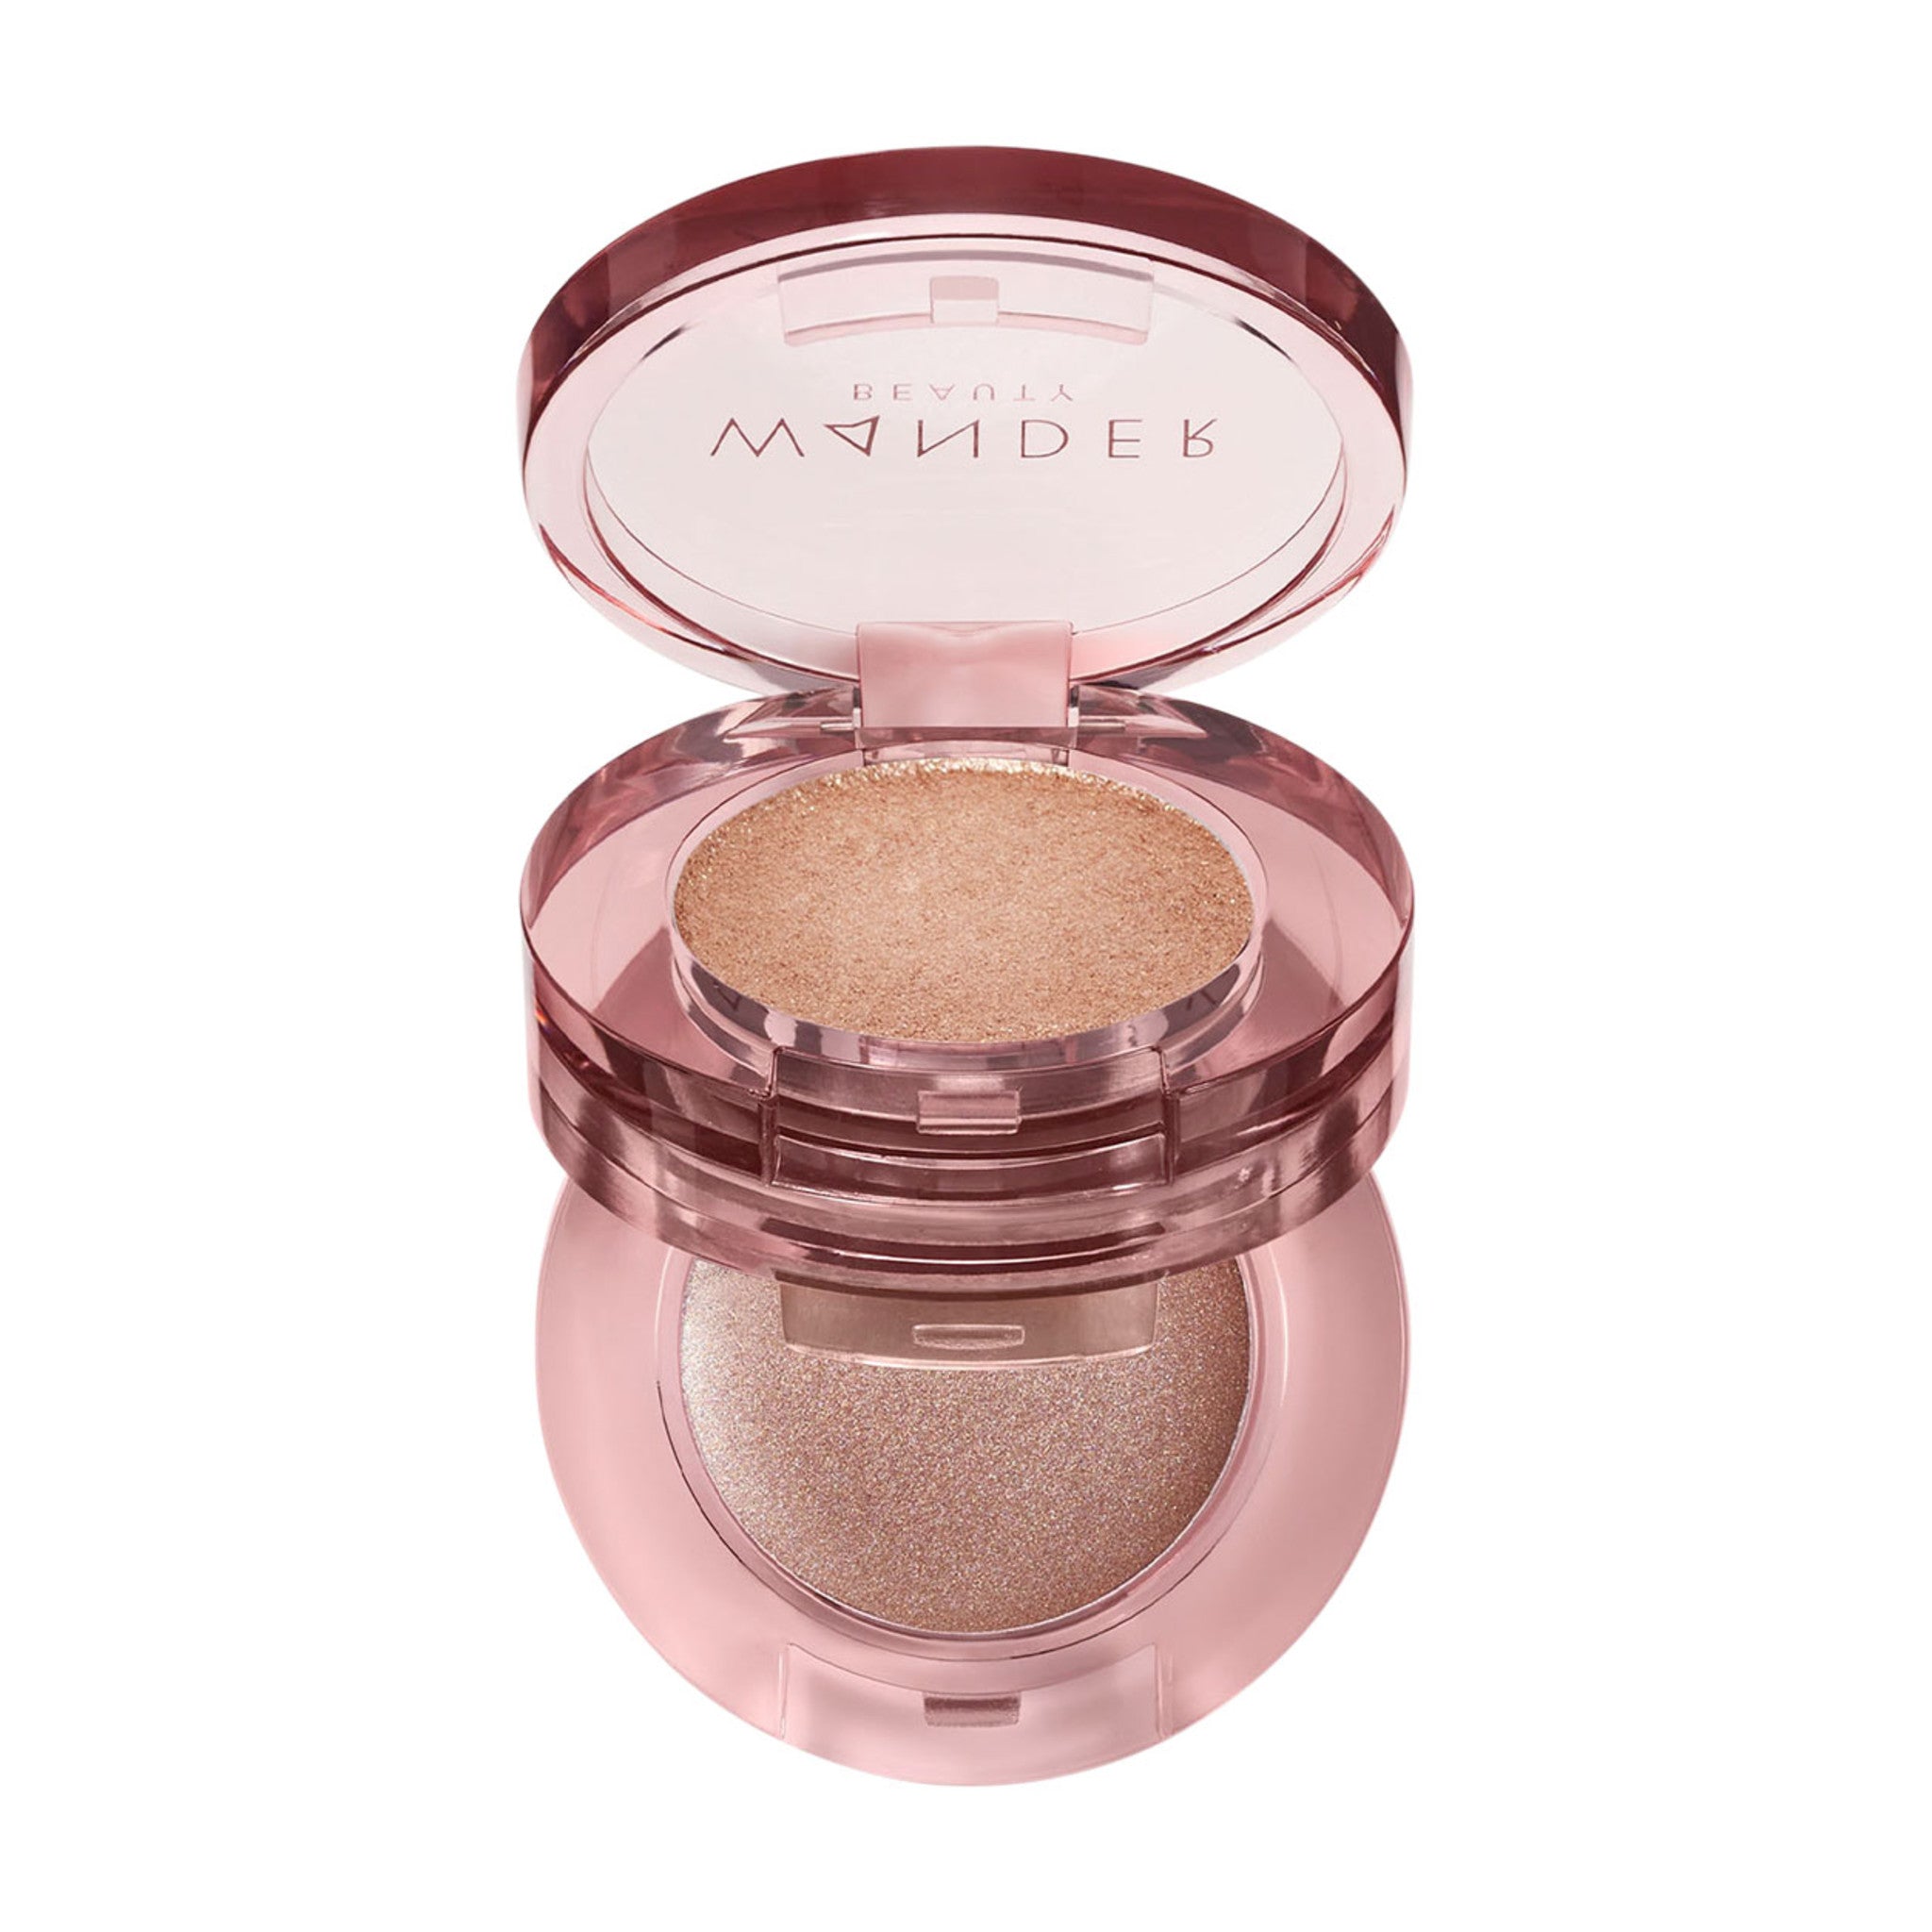 Wander Beauty Double Date Eyeshadow Duo Color/Shade variant: Smitten/Swoon main image. This product is in the color brown